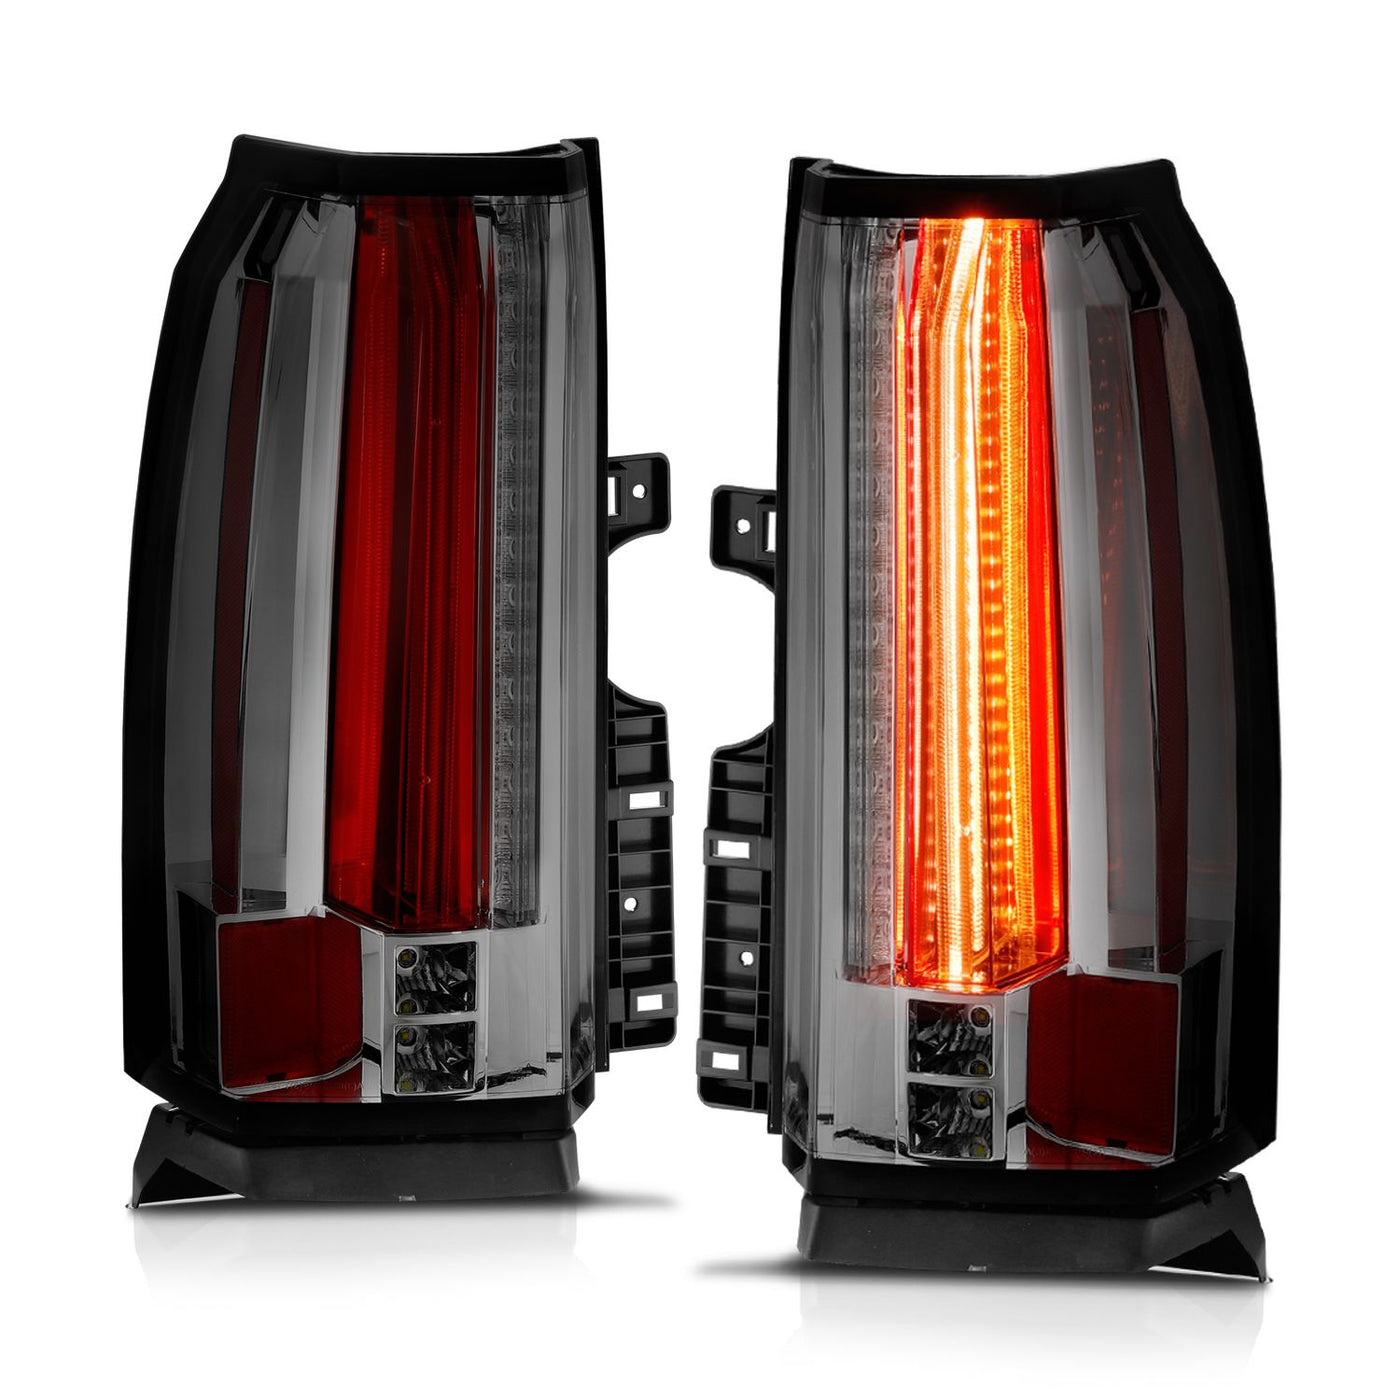 Chevy Tahoe Tail Lights, Chevy Suburban Tail Lights, Tahoe Tail Lights, Tahoe 15-19 Tail Lights, Suburban 15-19 Tail Lights, Tail Lights, Anzo Tail Lights, Smoke Tail Lights, Led Tail Lights